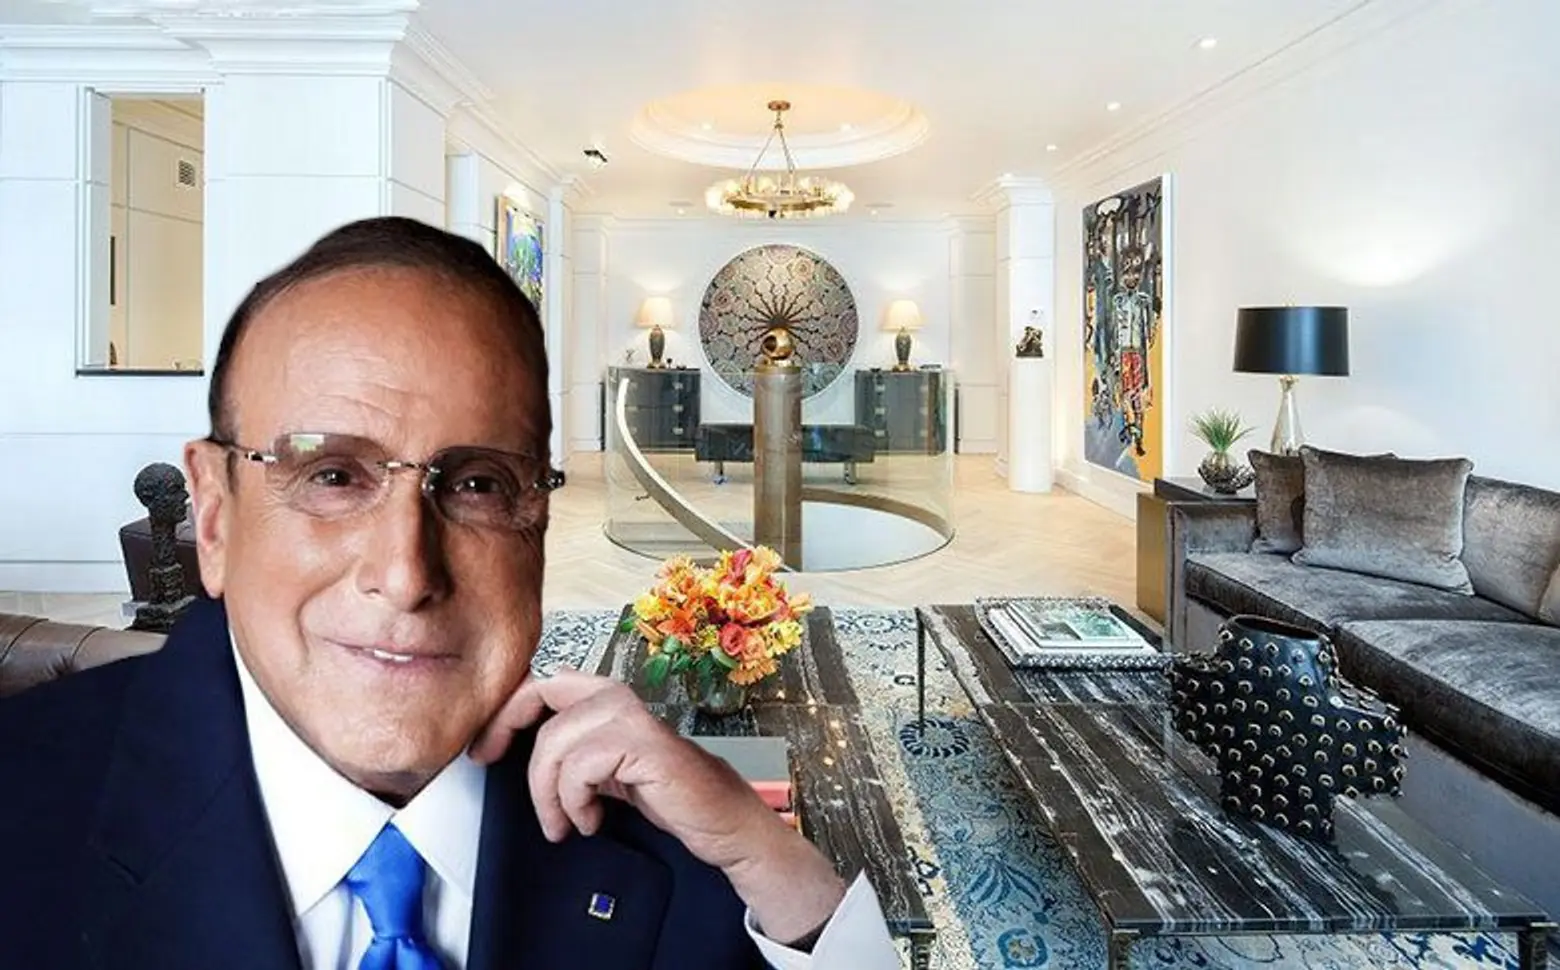 Clive Davis chops the price of his ritzy Midtown duplex to $6.996M